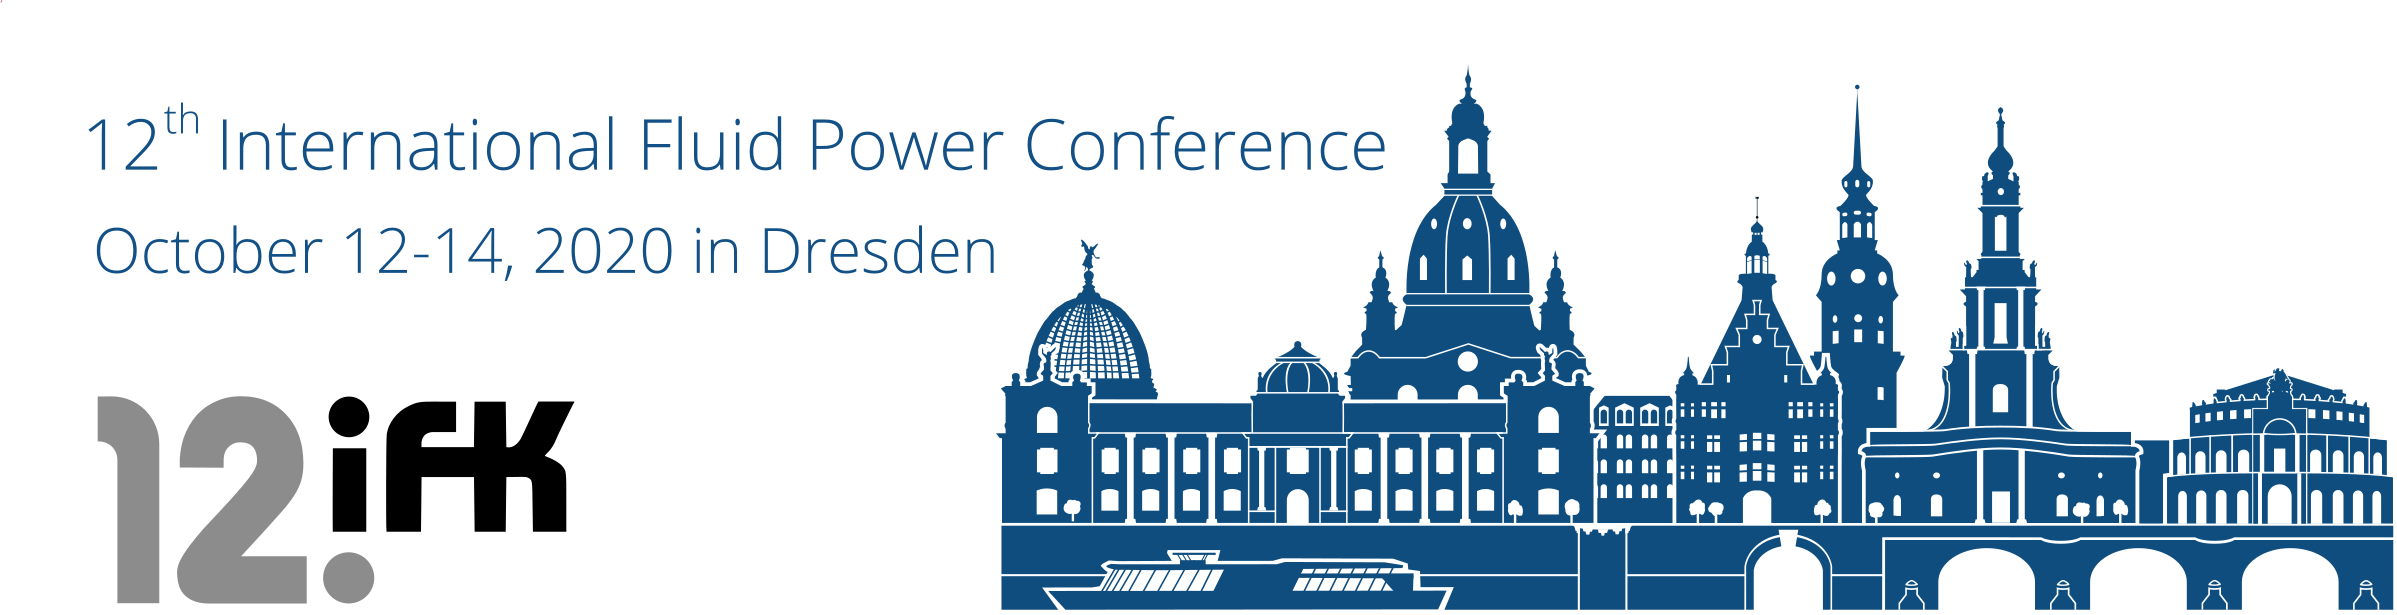 12th International Fluid Power Conference